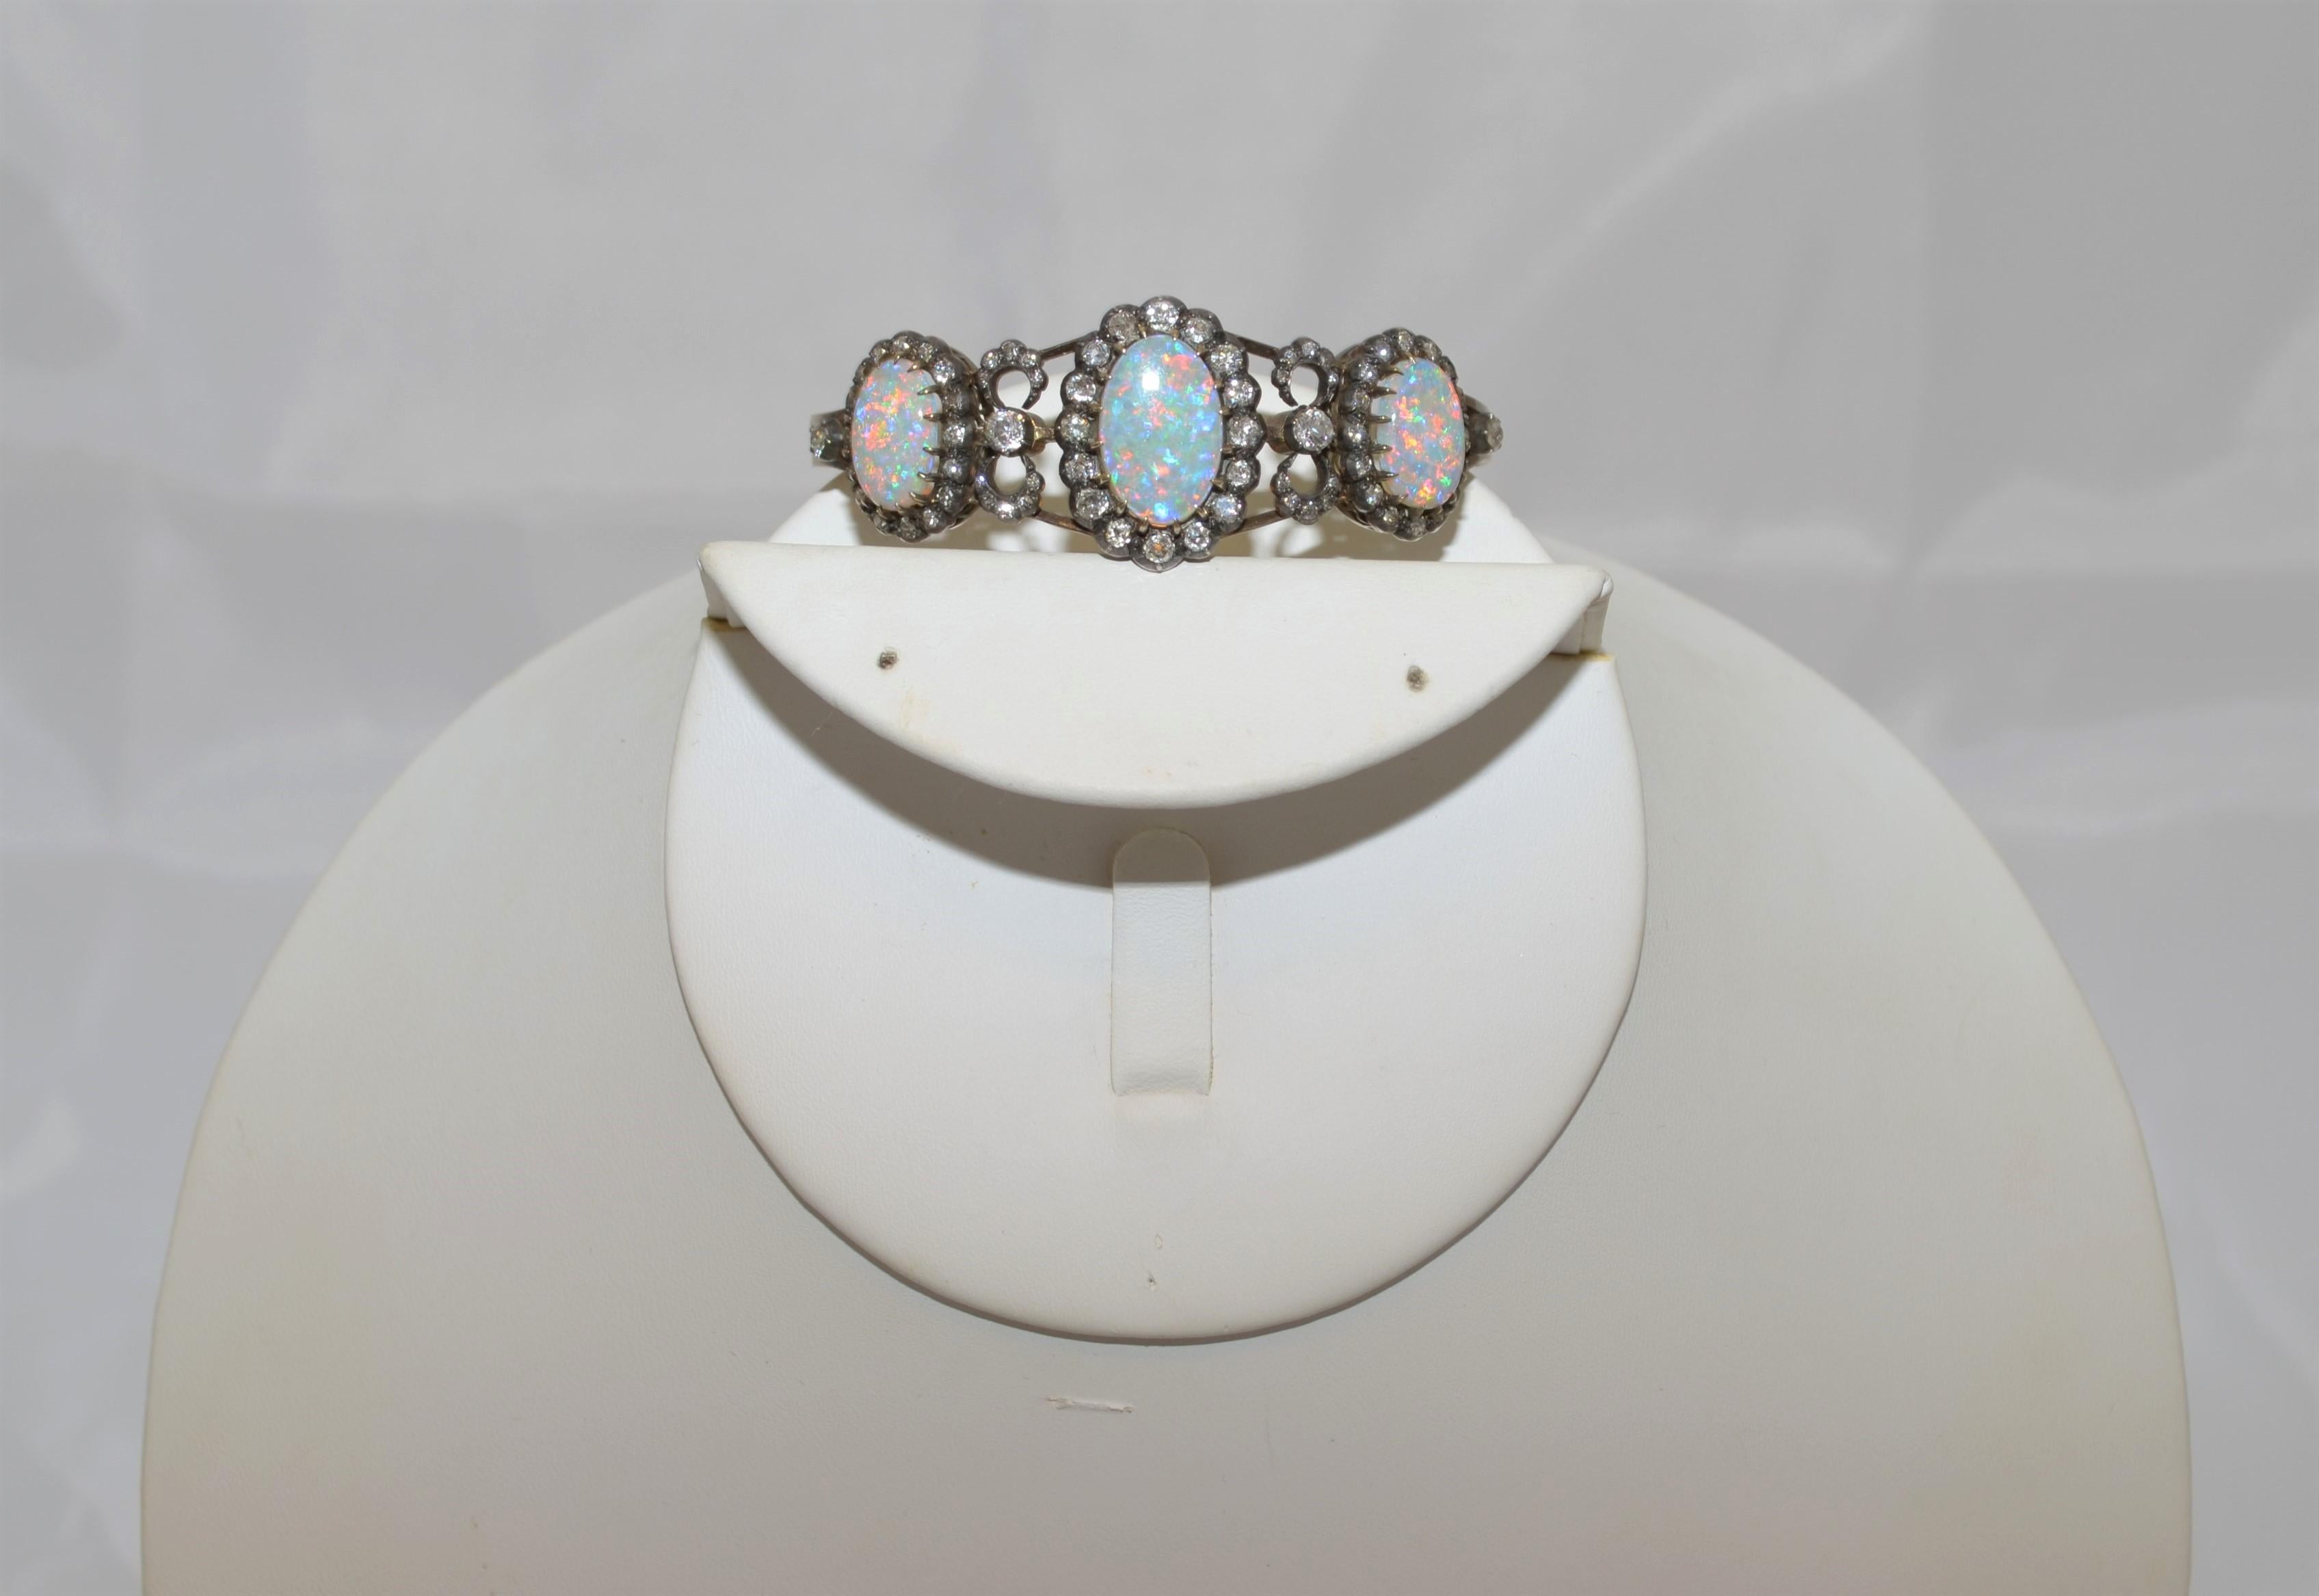 Late Victorian era (late 19th century-early 20th century), gold, silver, diamond and opal bracelet. Bracelet features 3 large AAA white cabochan cut opals that measure 16mm x 10mm x 3mm and two 13mm x 10mm x 3mm with estimated carat weight of 4.78